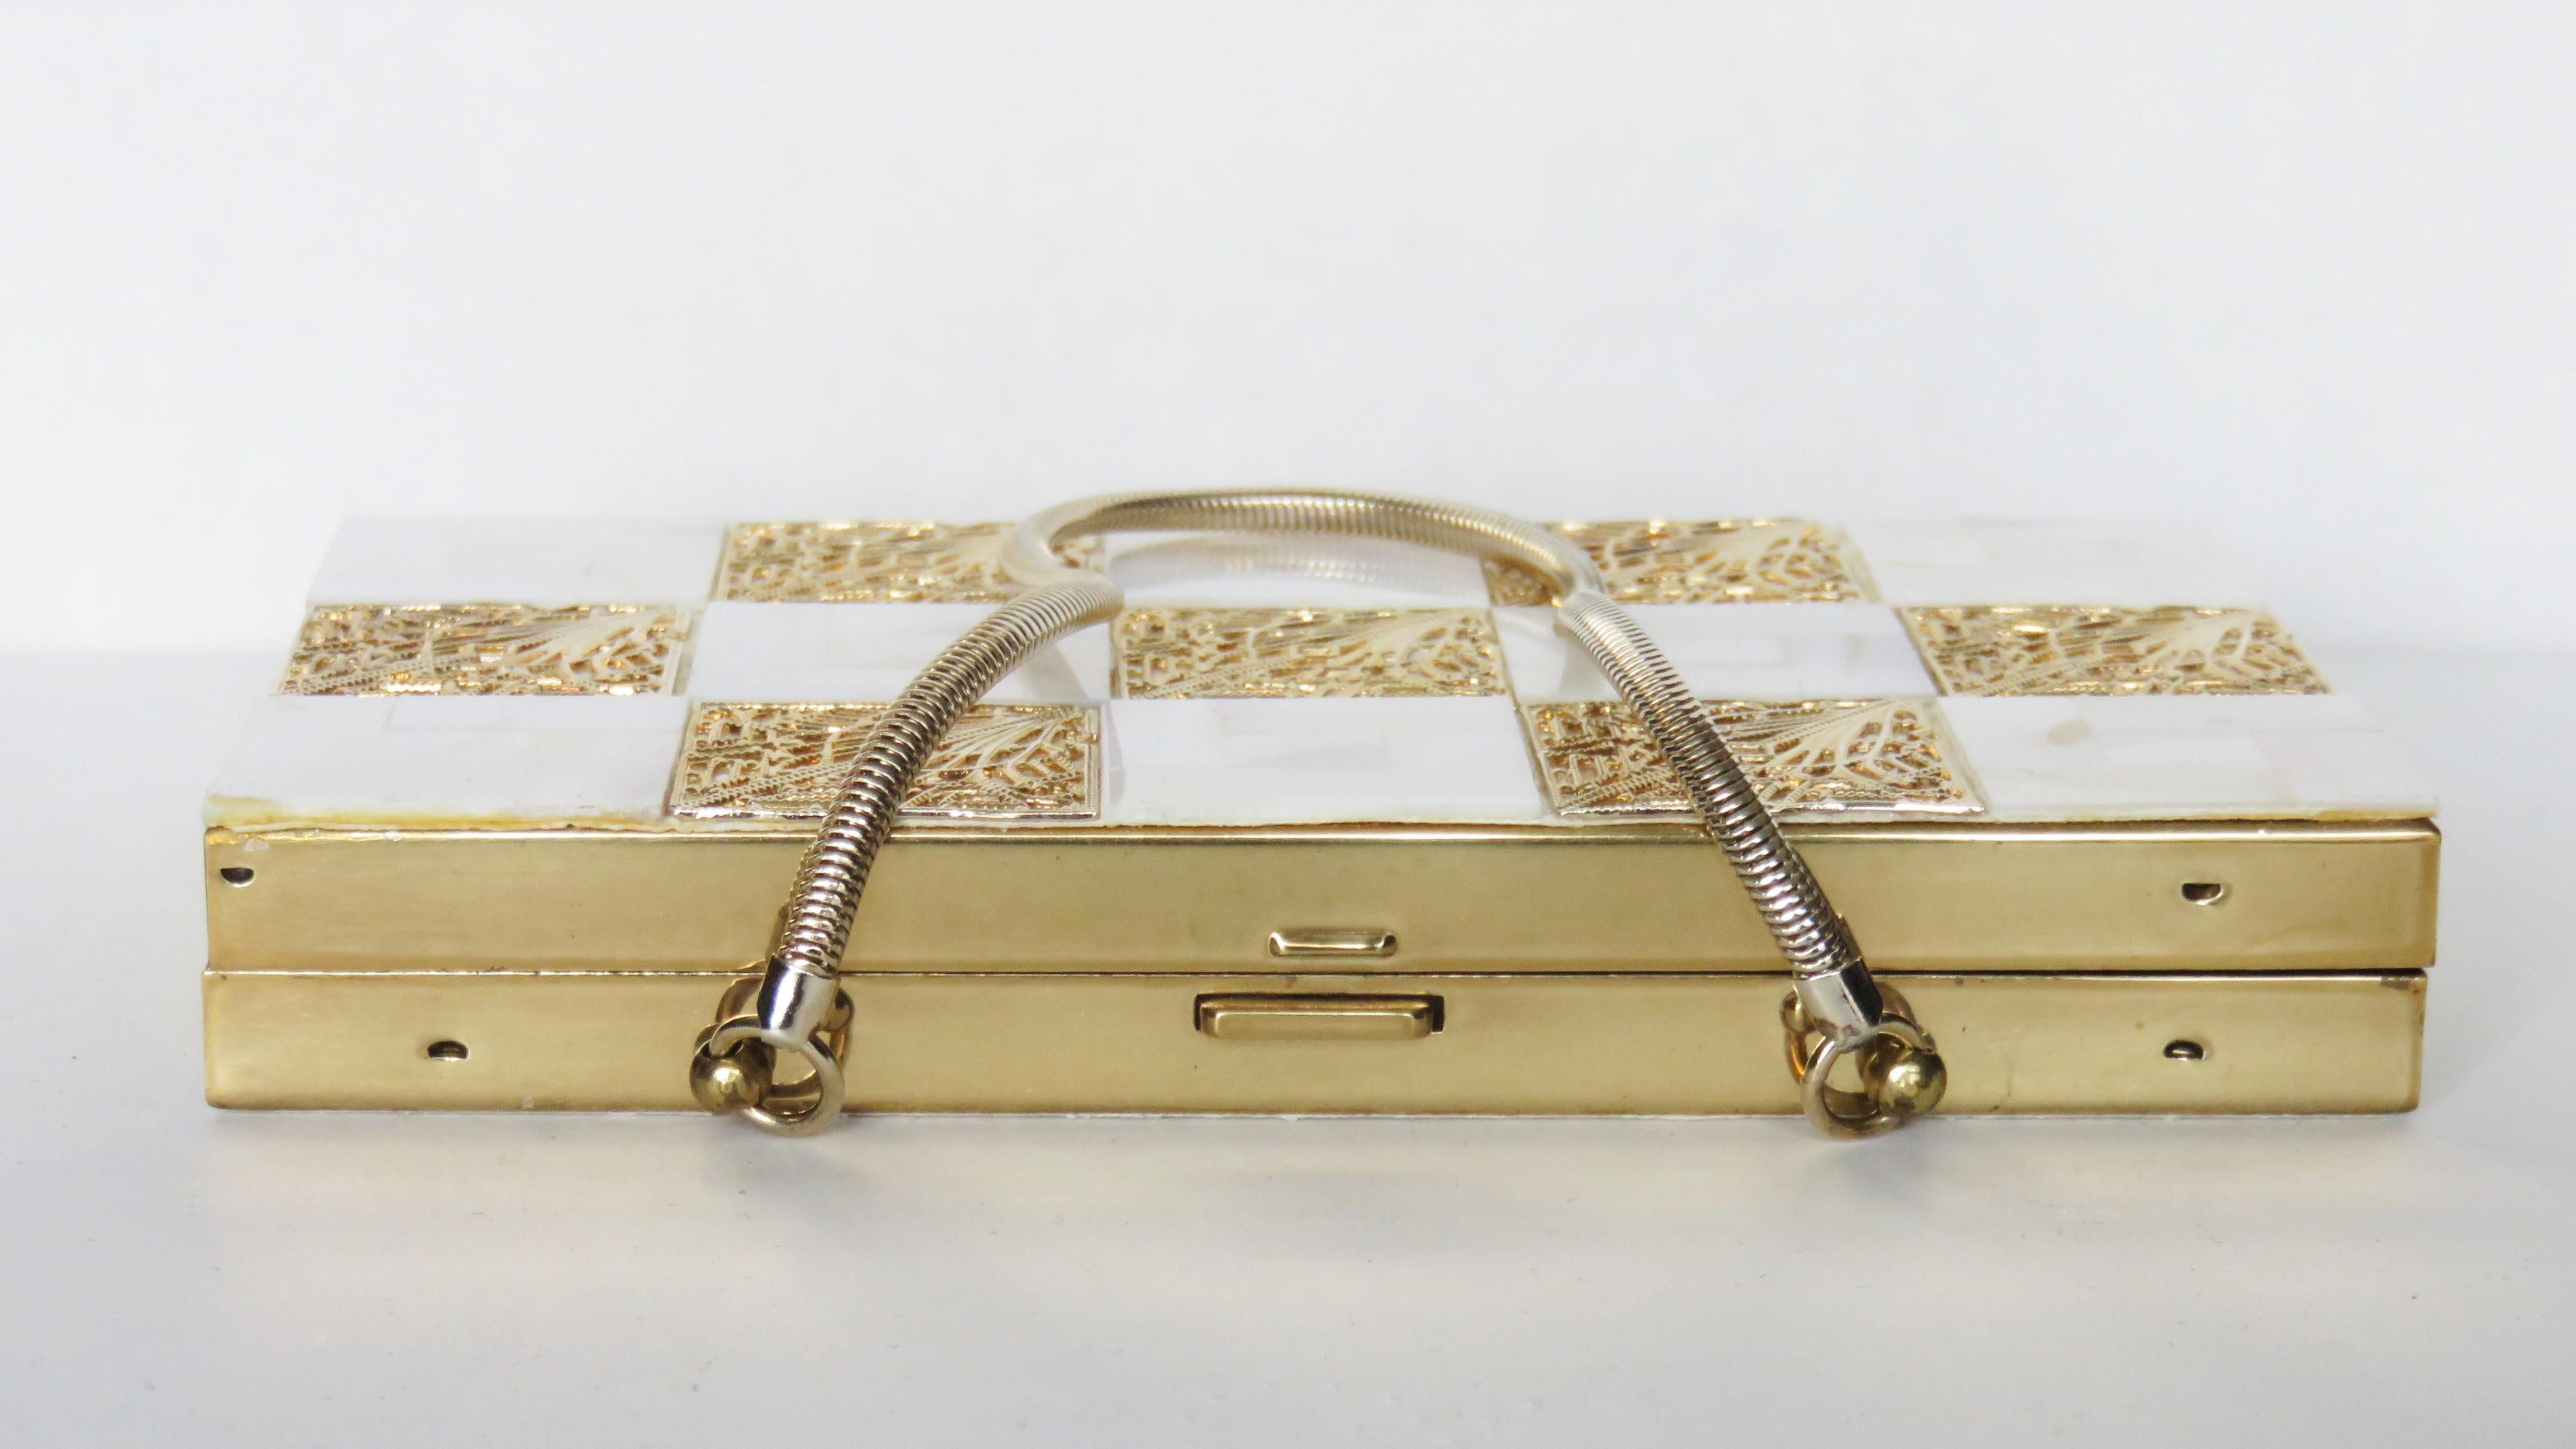 Beige Mother of Pearl and Filigree 1950s Compact Purse Minaudiere